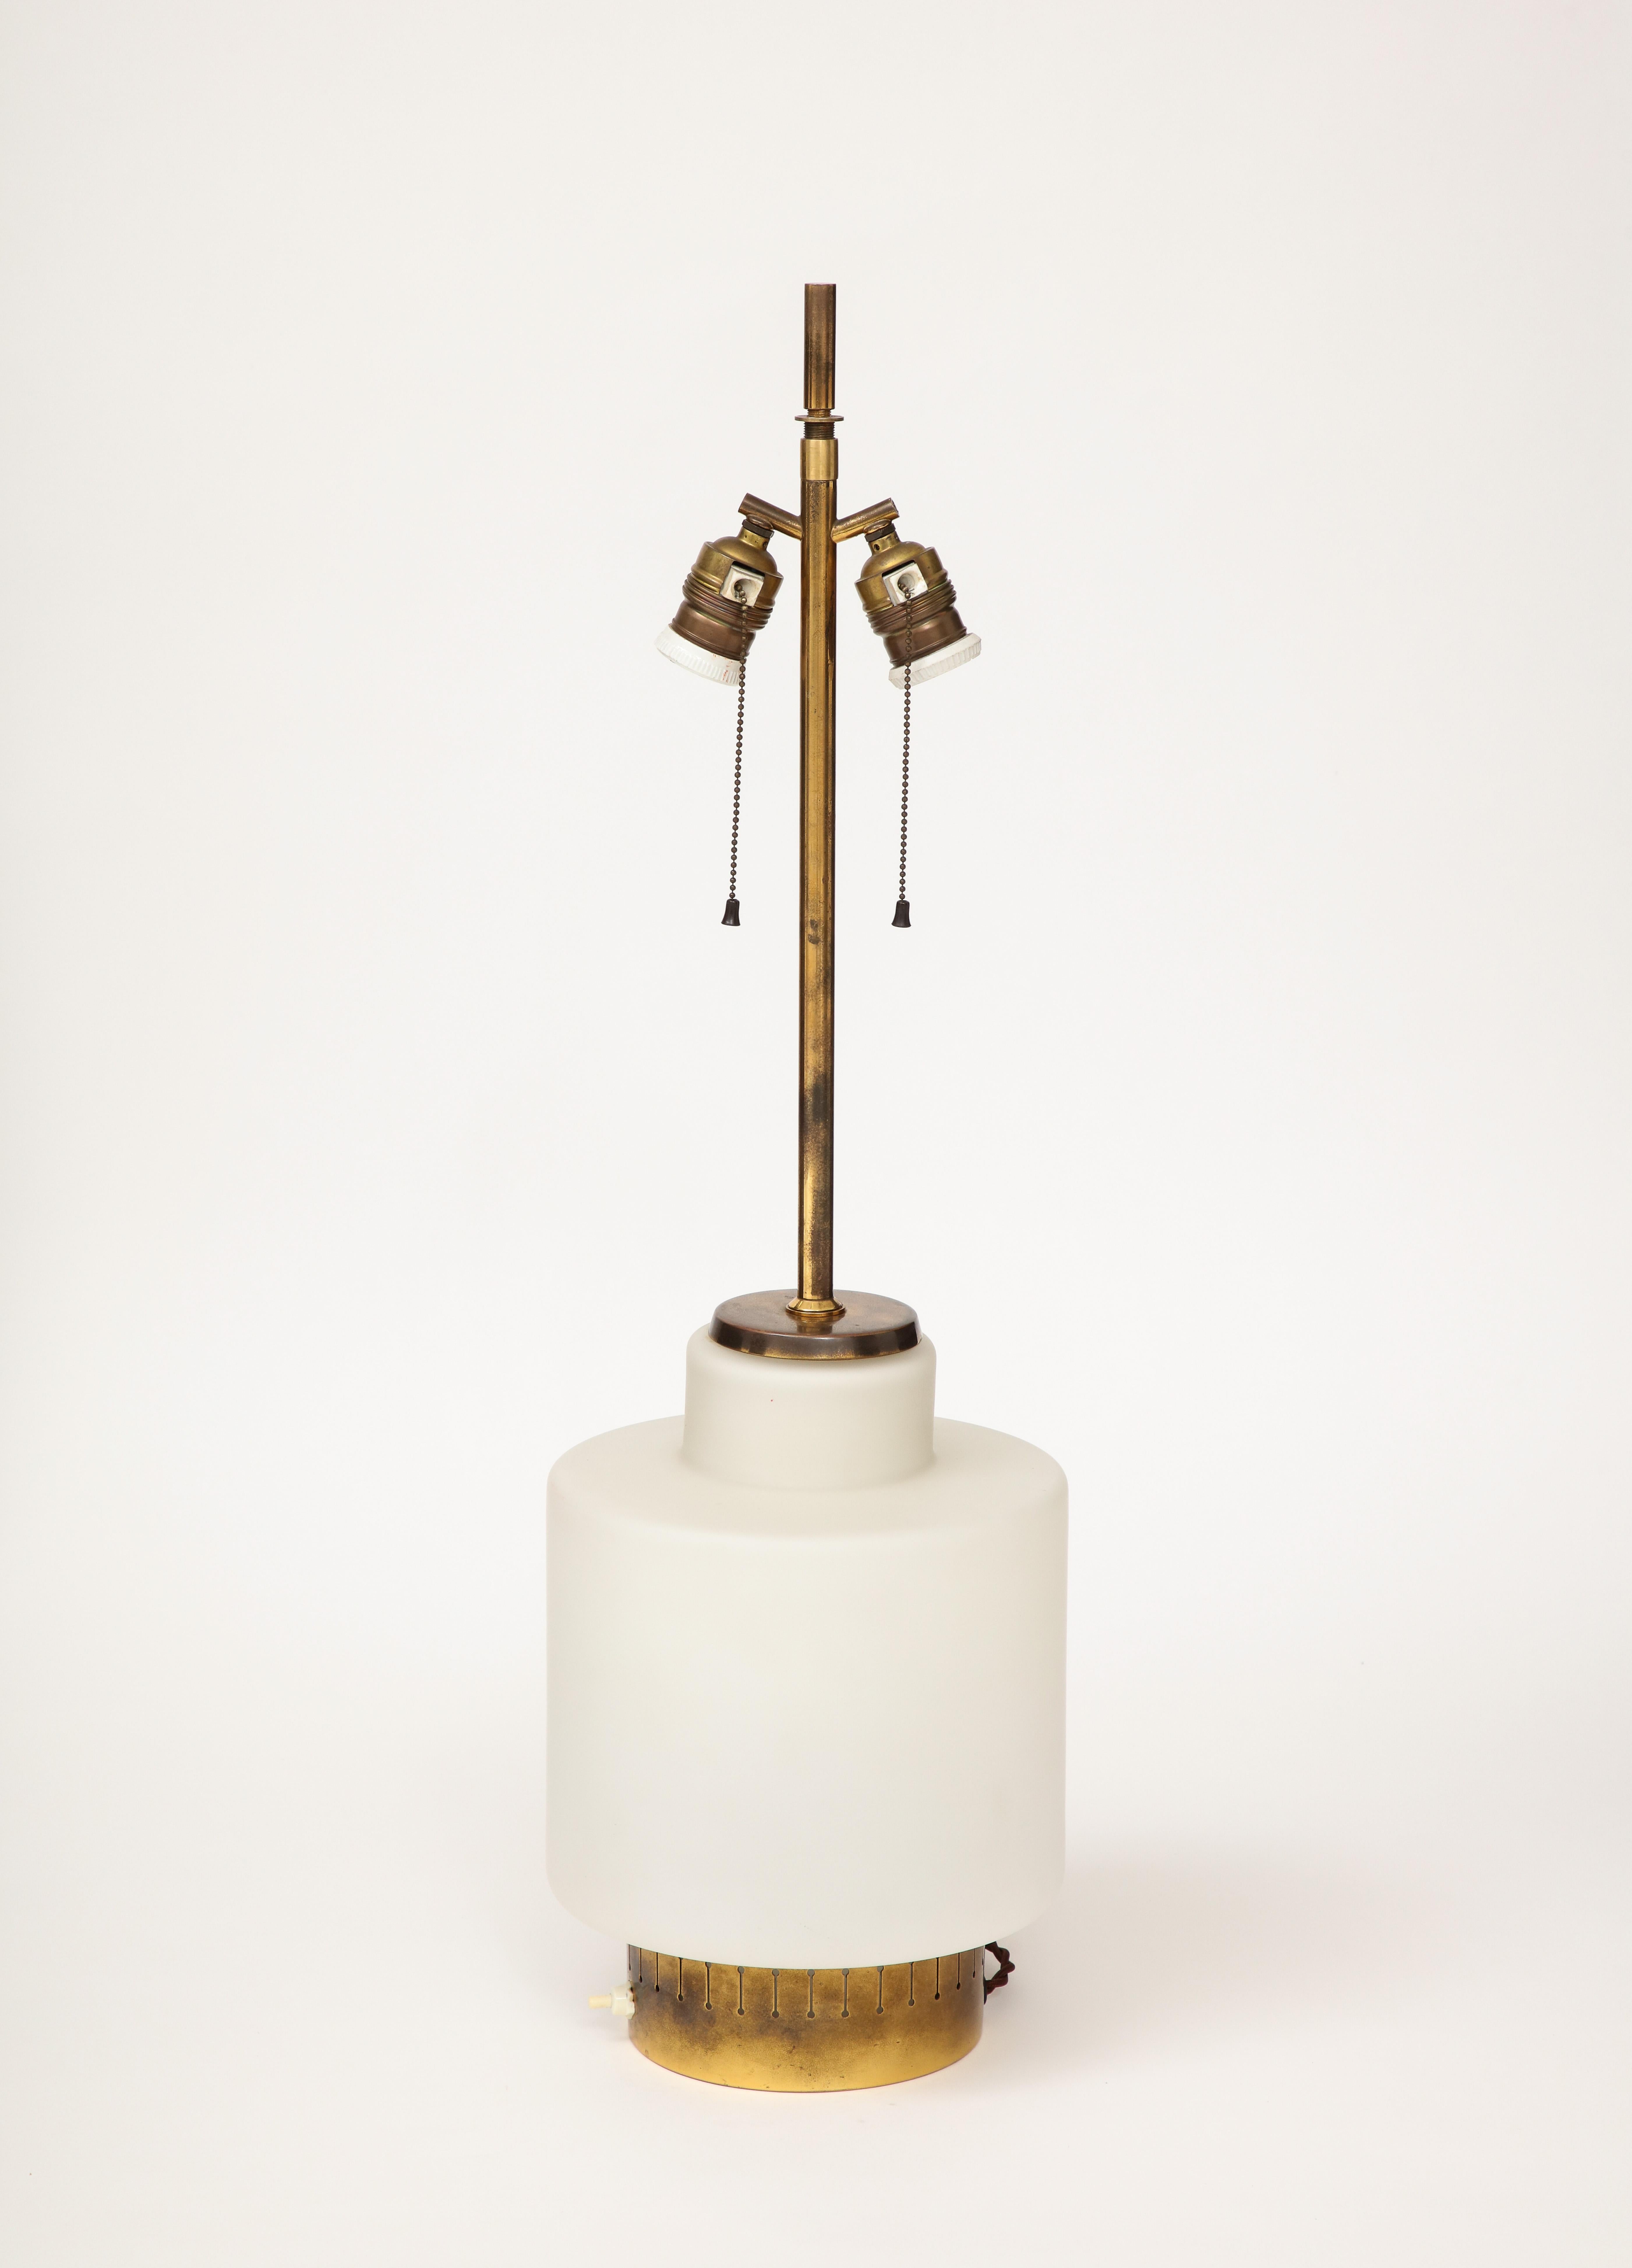 Stilnovo Opaline & Brass Lamp, mod. 8055, Parchment Shade, Italy, c. 1950's For Sale 8